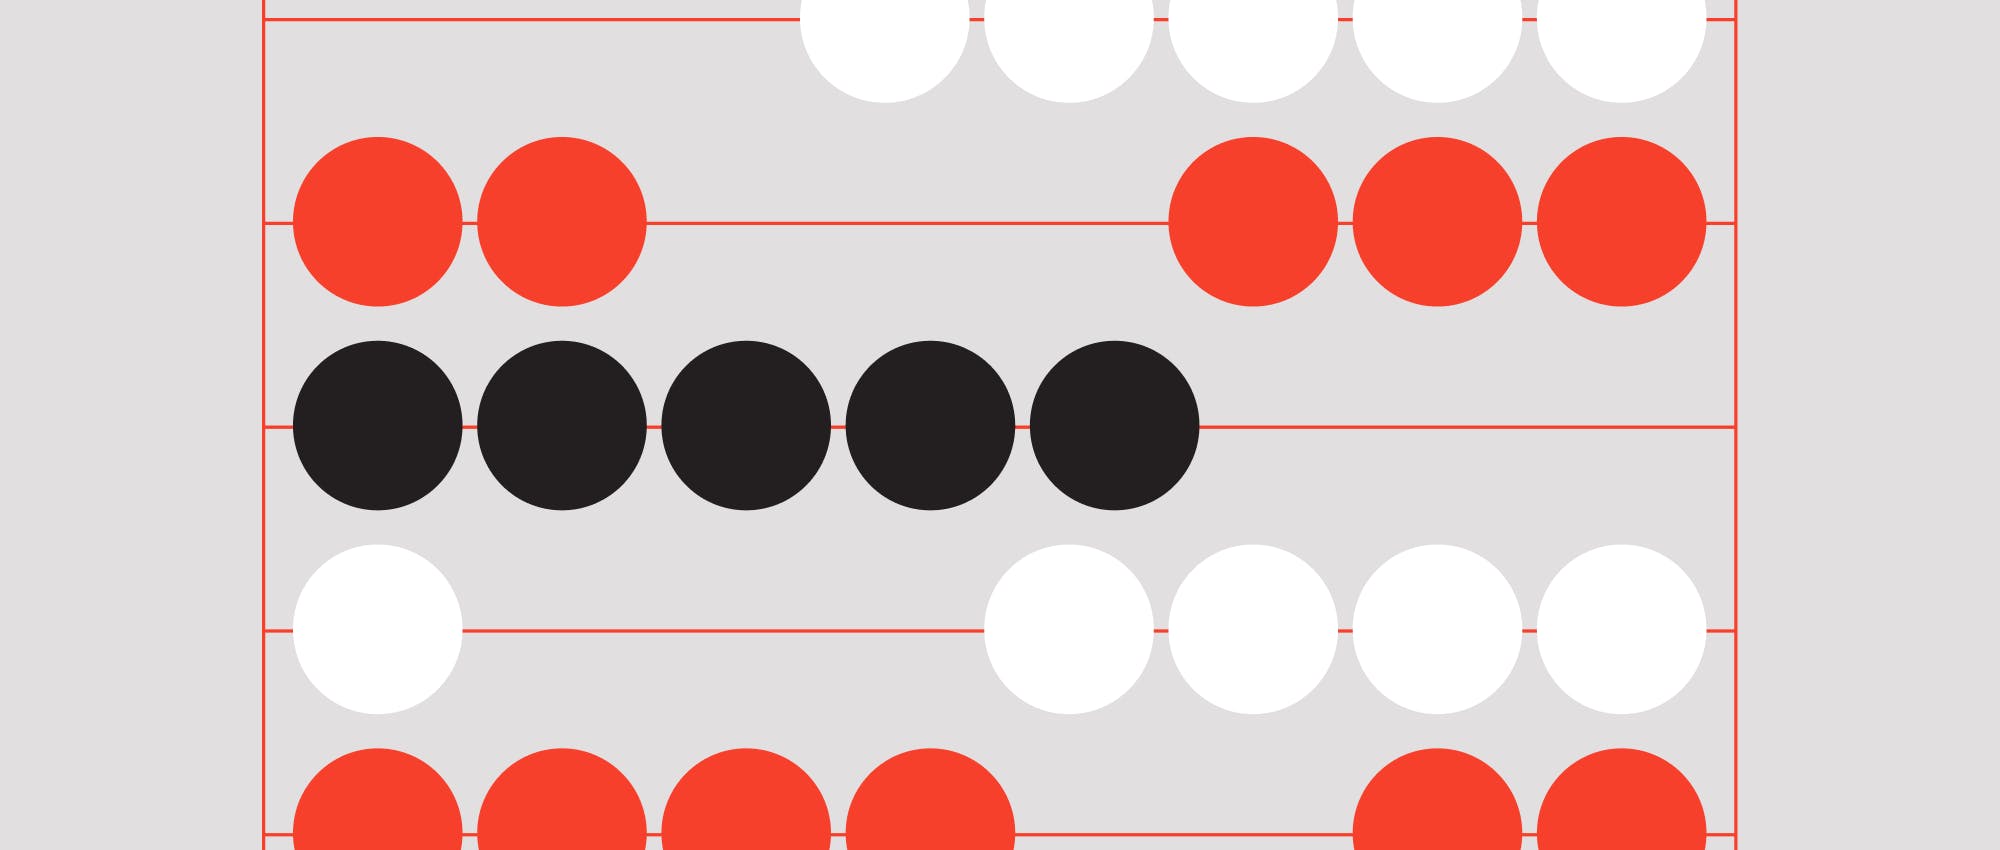 A vector representation of an abacus with white, red, and black beads.